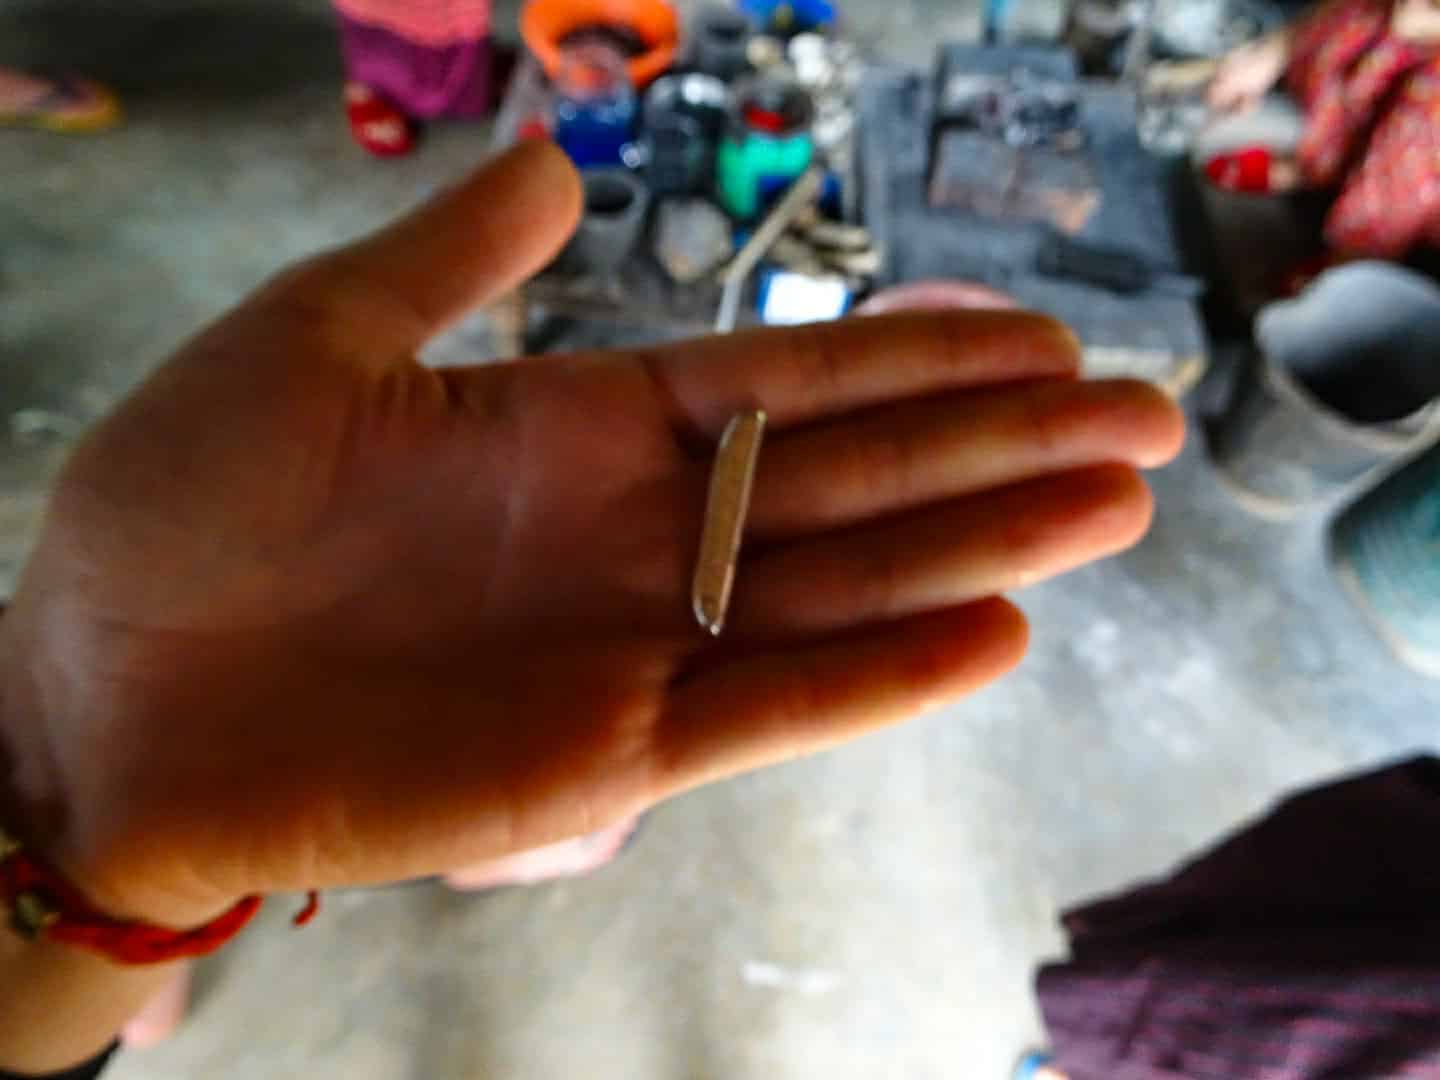 A sliver of silver, melted only seconds before, Inle Lake, Myanmar